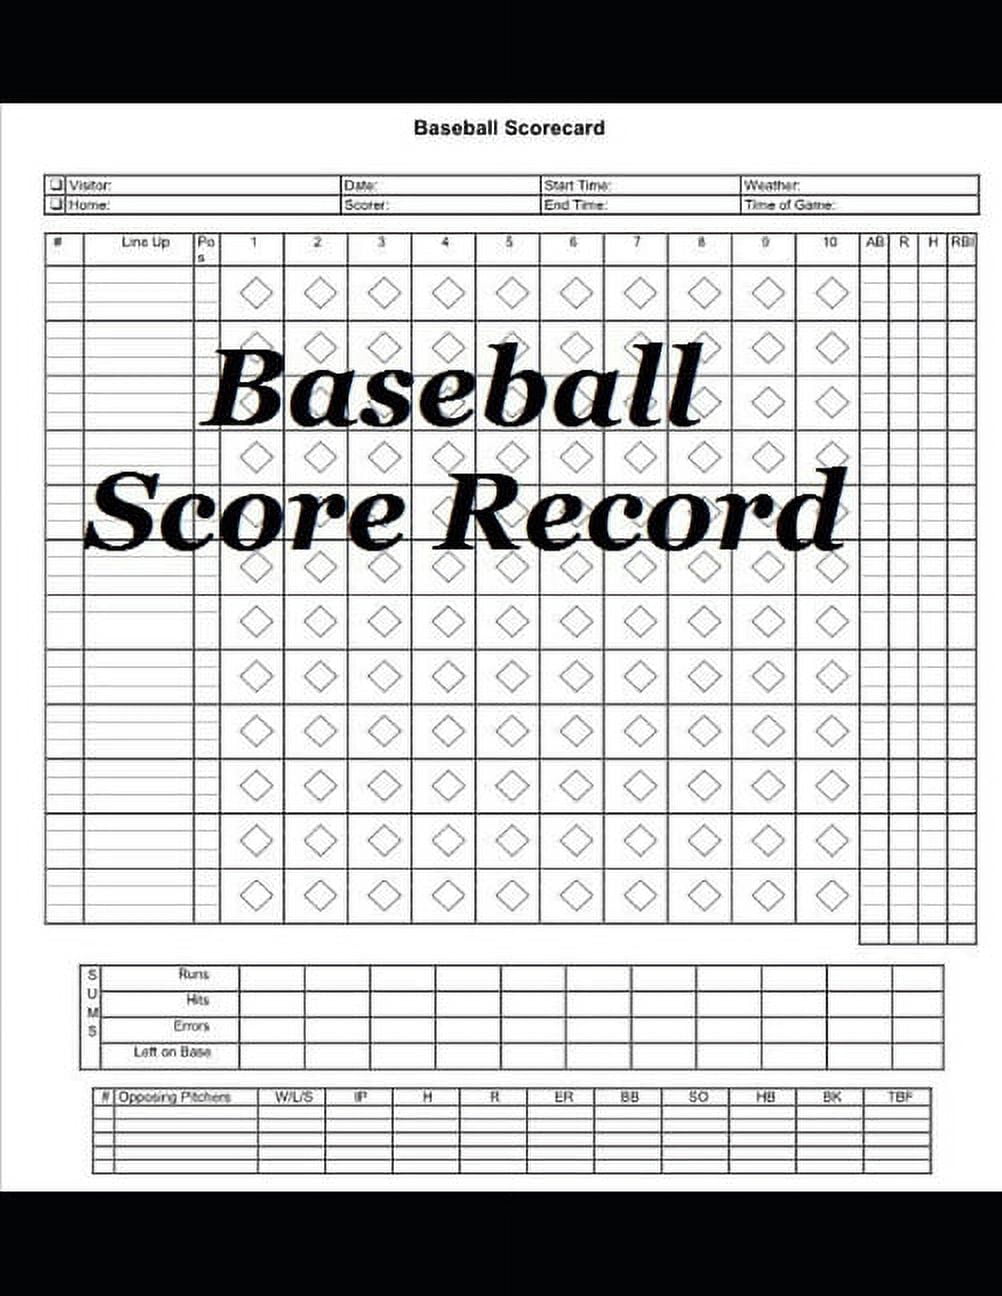 Baseball Score Record The Ultimate Record Keeping Book for Baseball Teams and Fans